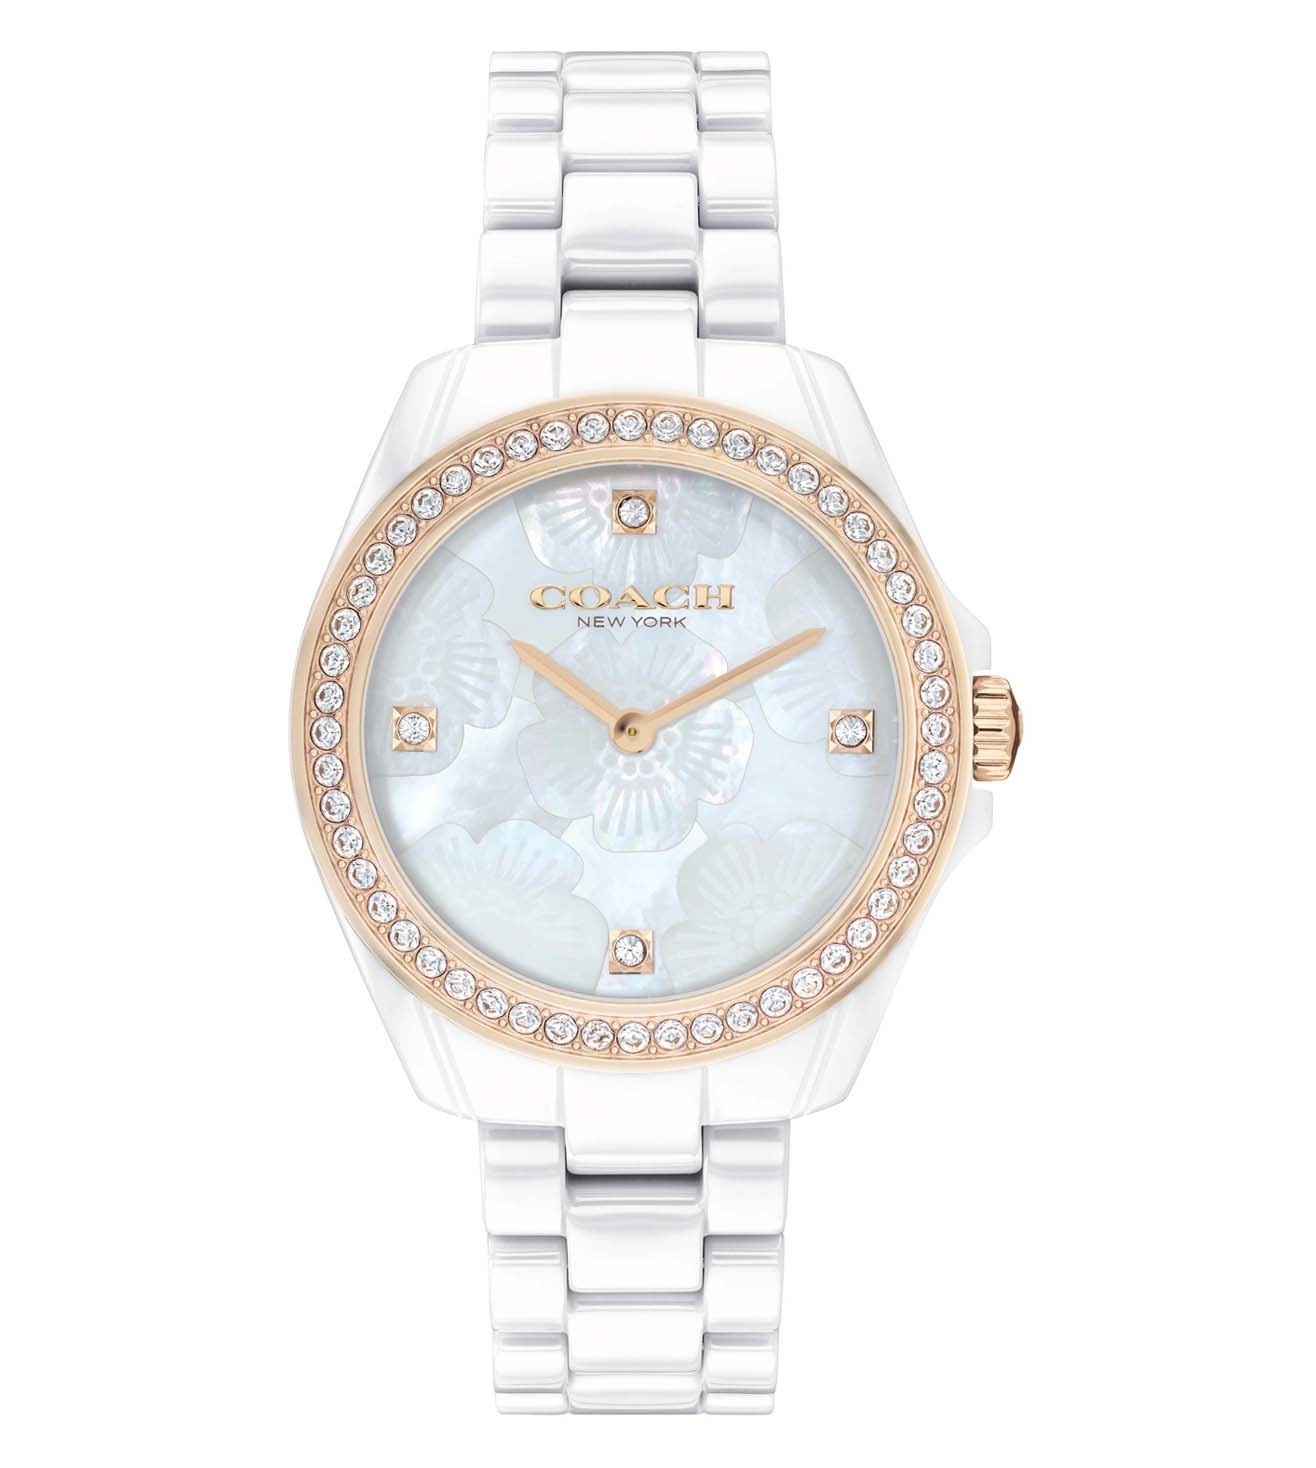 ĐỒNG HỒ NỮ COACH WOMENS 33.25 MM PRESTON MOTHER OF PEARL DIAL STAINLESS STEEL ANALOGUE WATCH 3